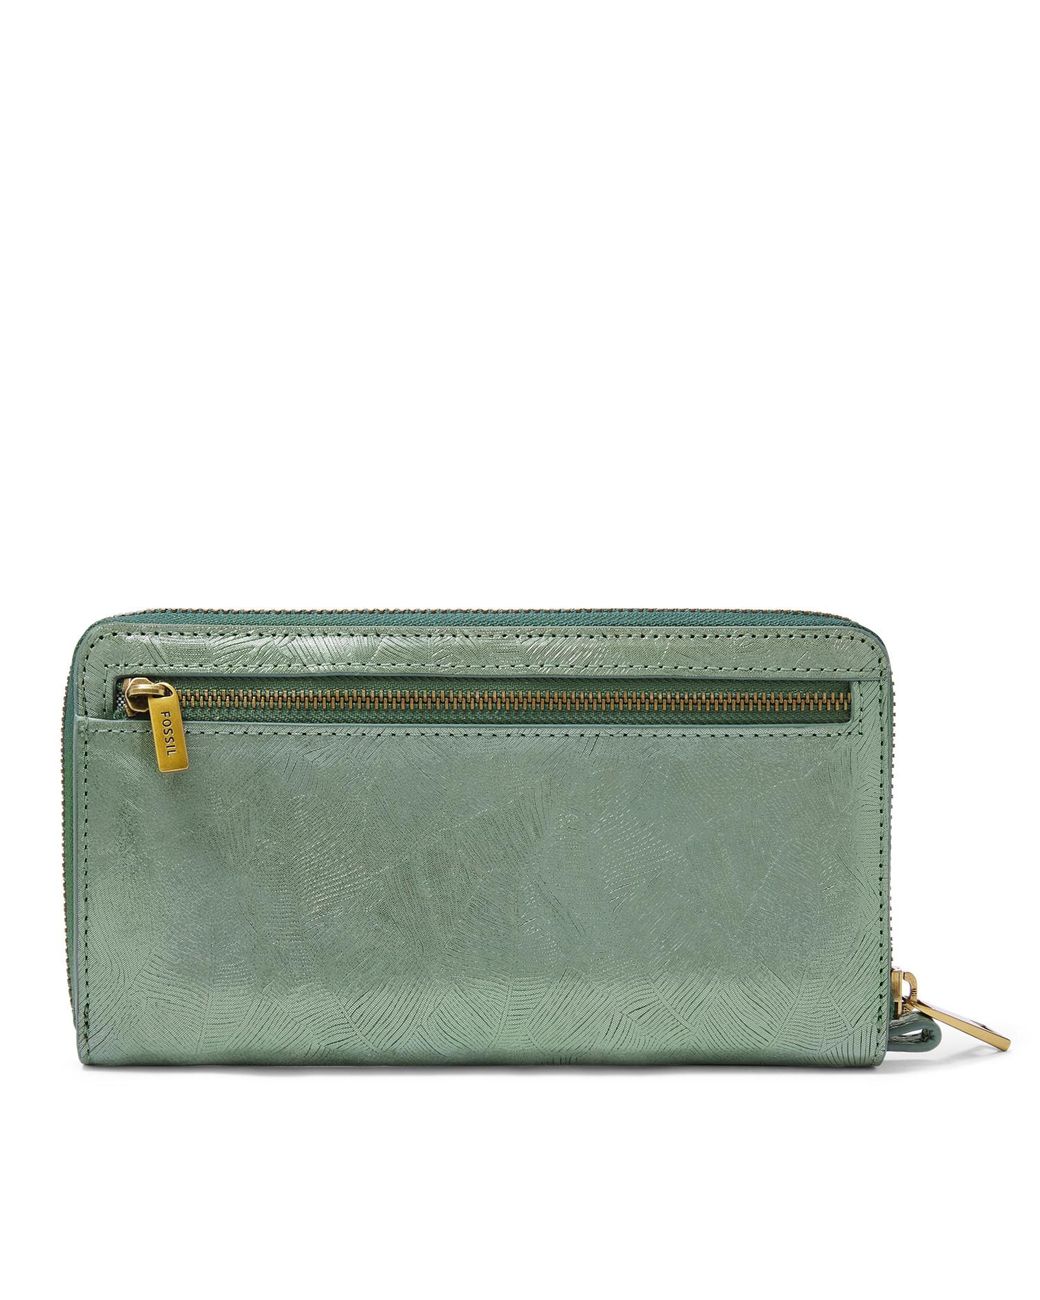 Fossil Liza Leather Wallet Zip Around Clutch With Wristlet Strap in Sage  Metallic (Green) - Save 33% | Lyst